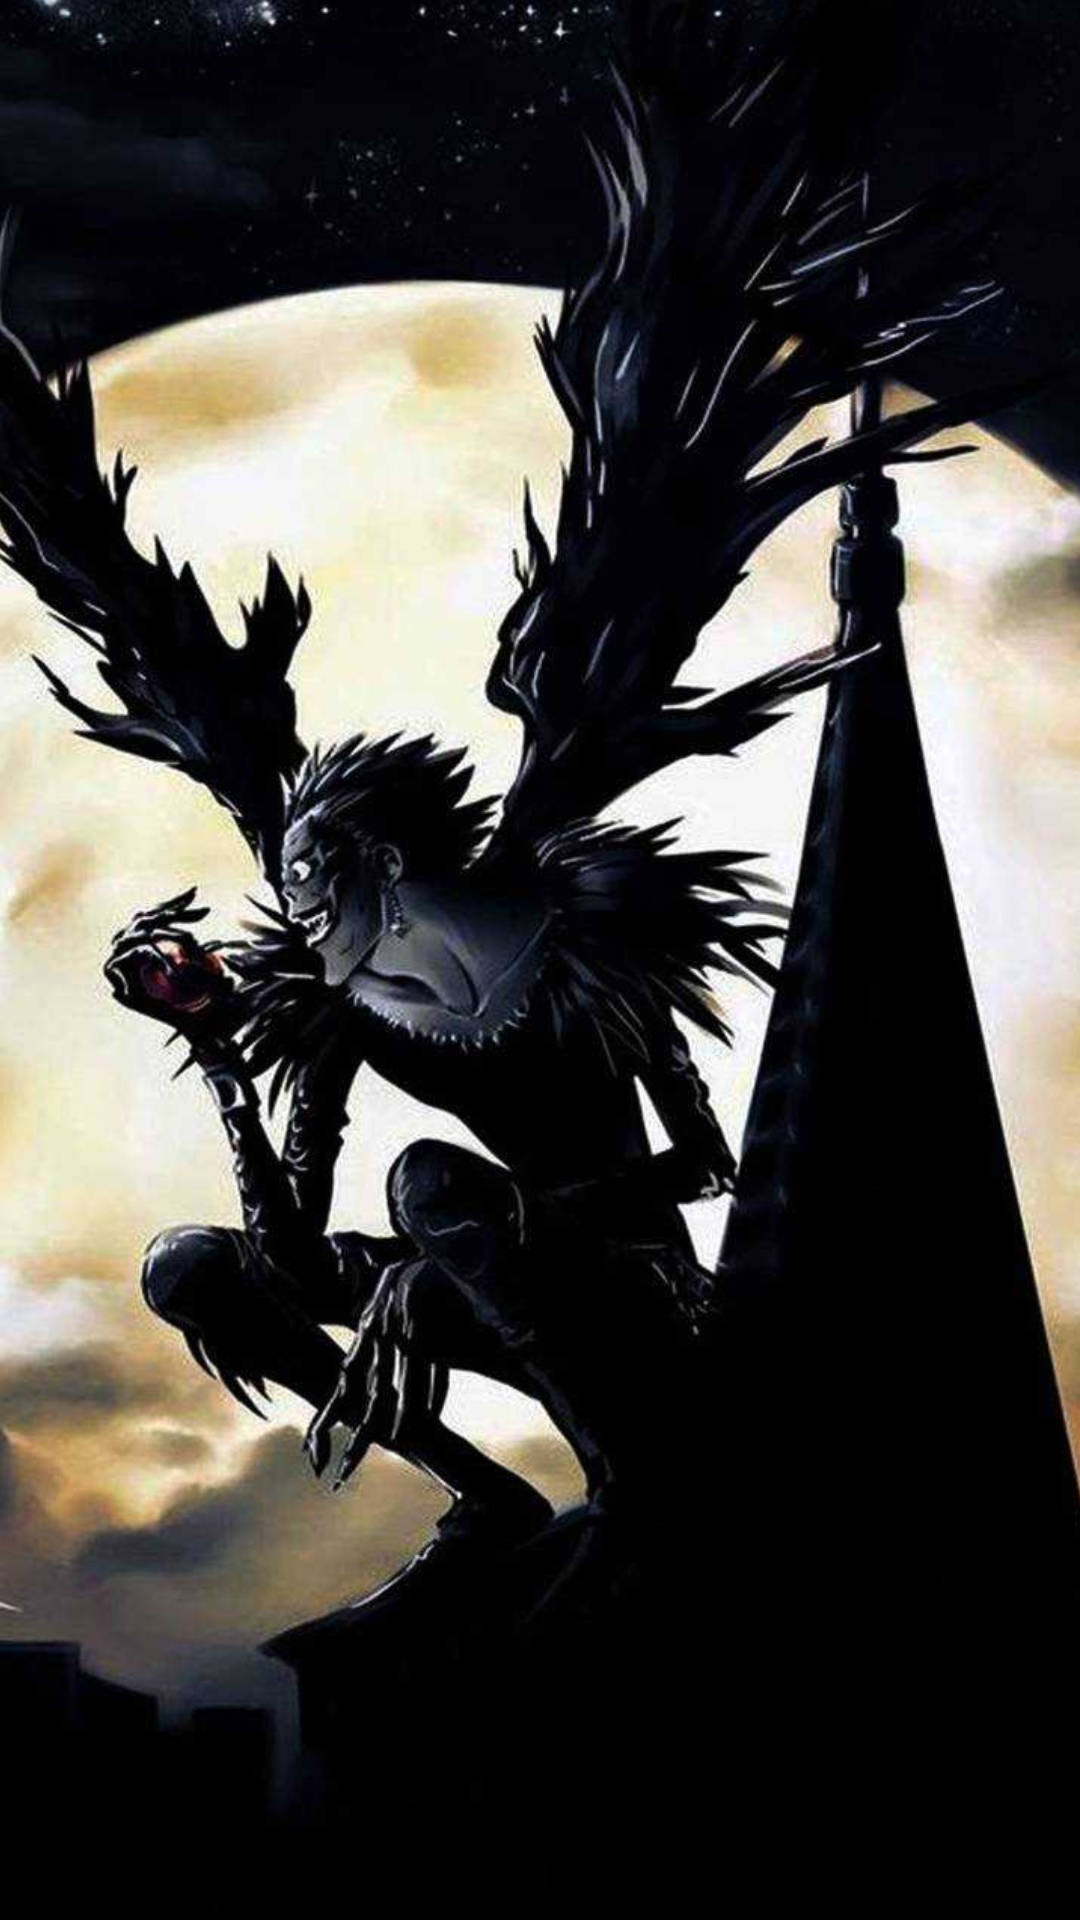 Download Full Moon And Ryuk From Death Note Iphone Wallpaper Wallpapers Com